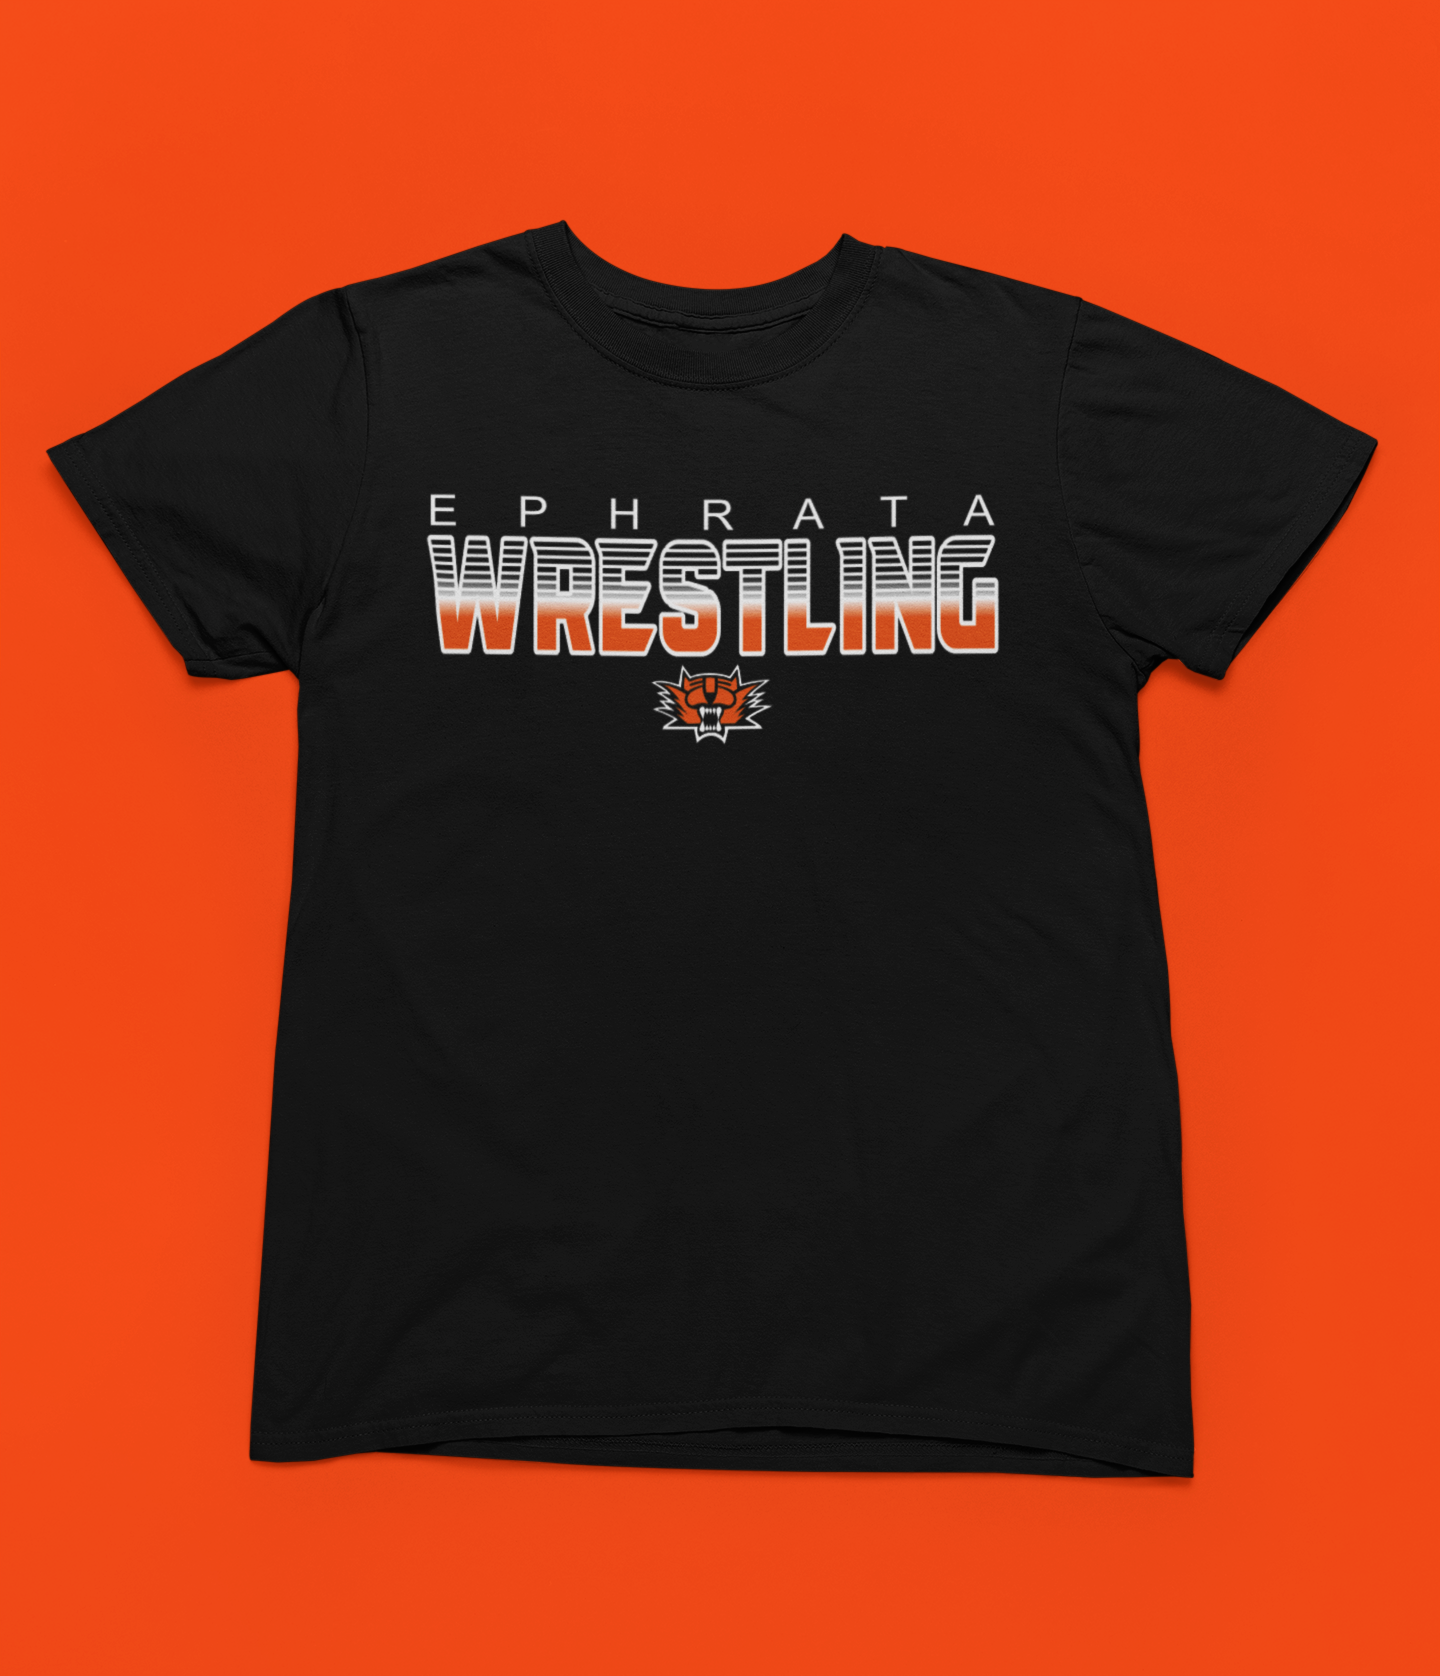 Youth Wrestling Adult T-Shirt